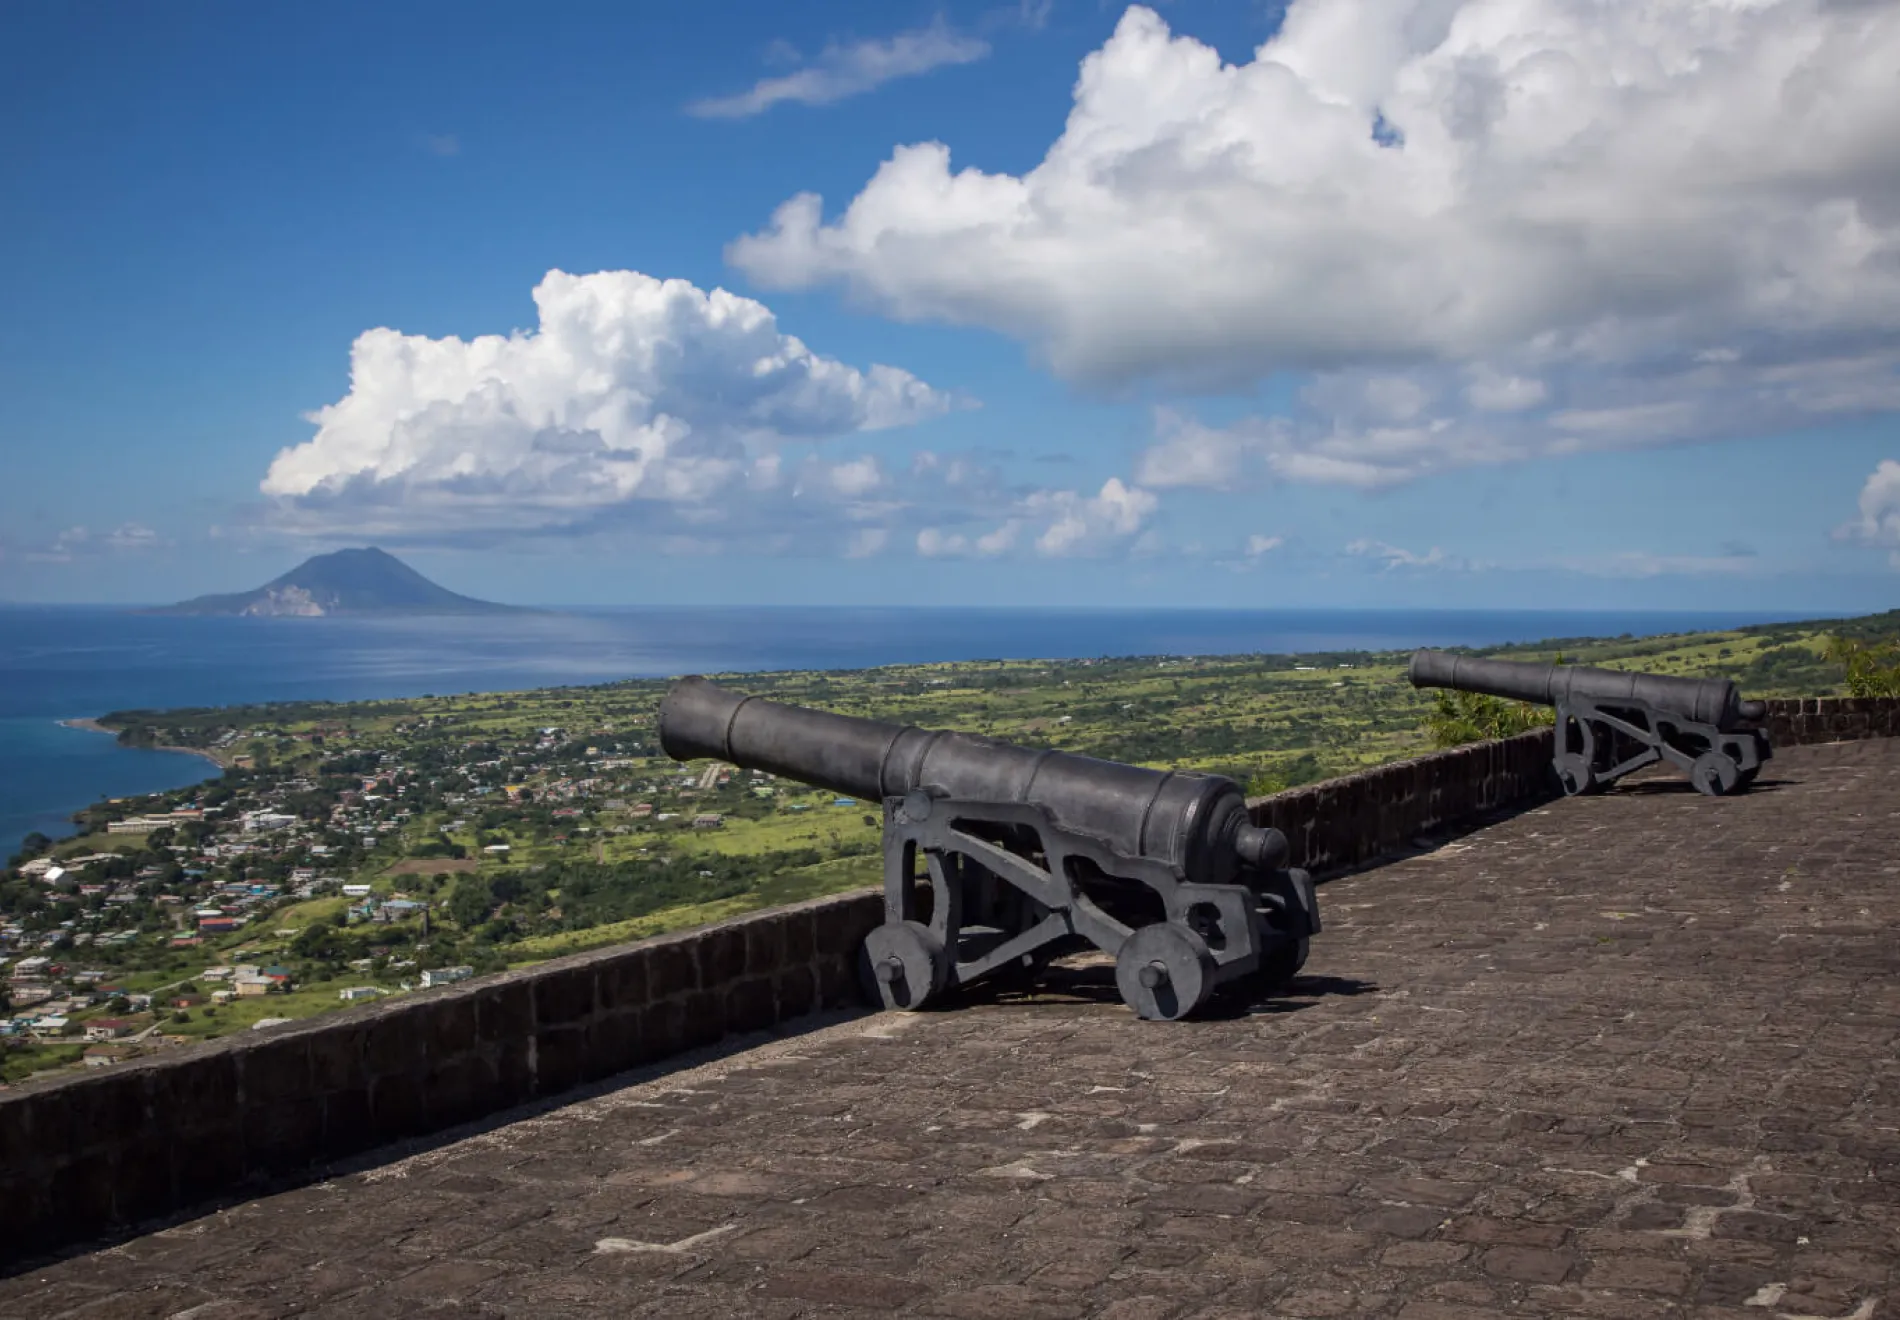 Enjoying the views of Brimstone Hill in St. Kitts